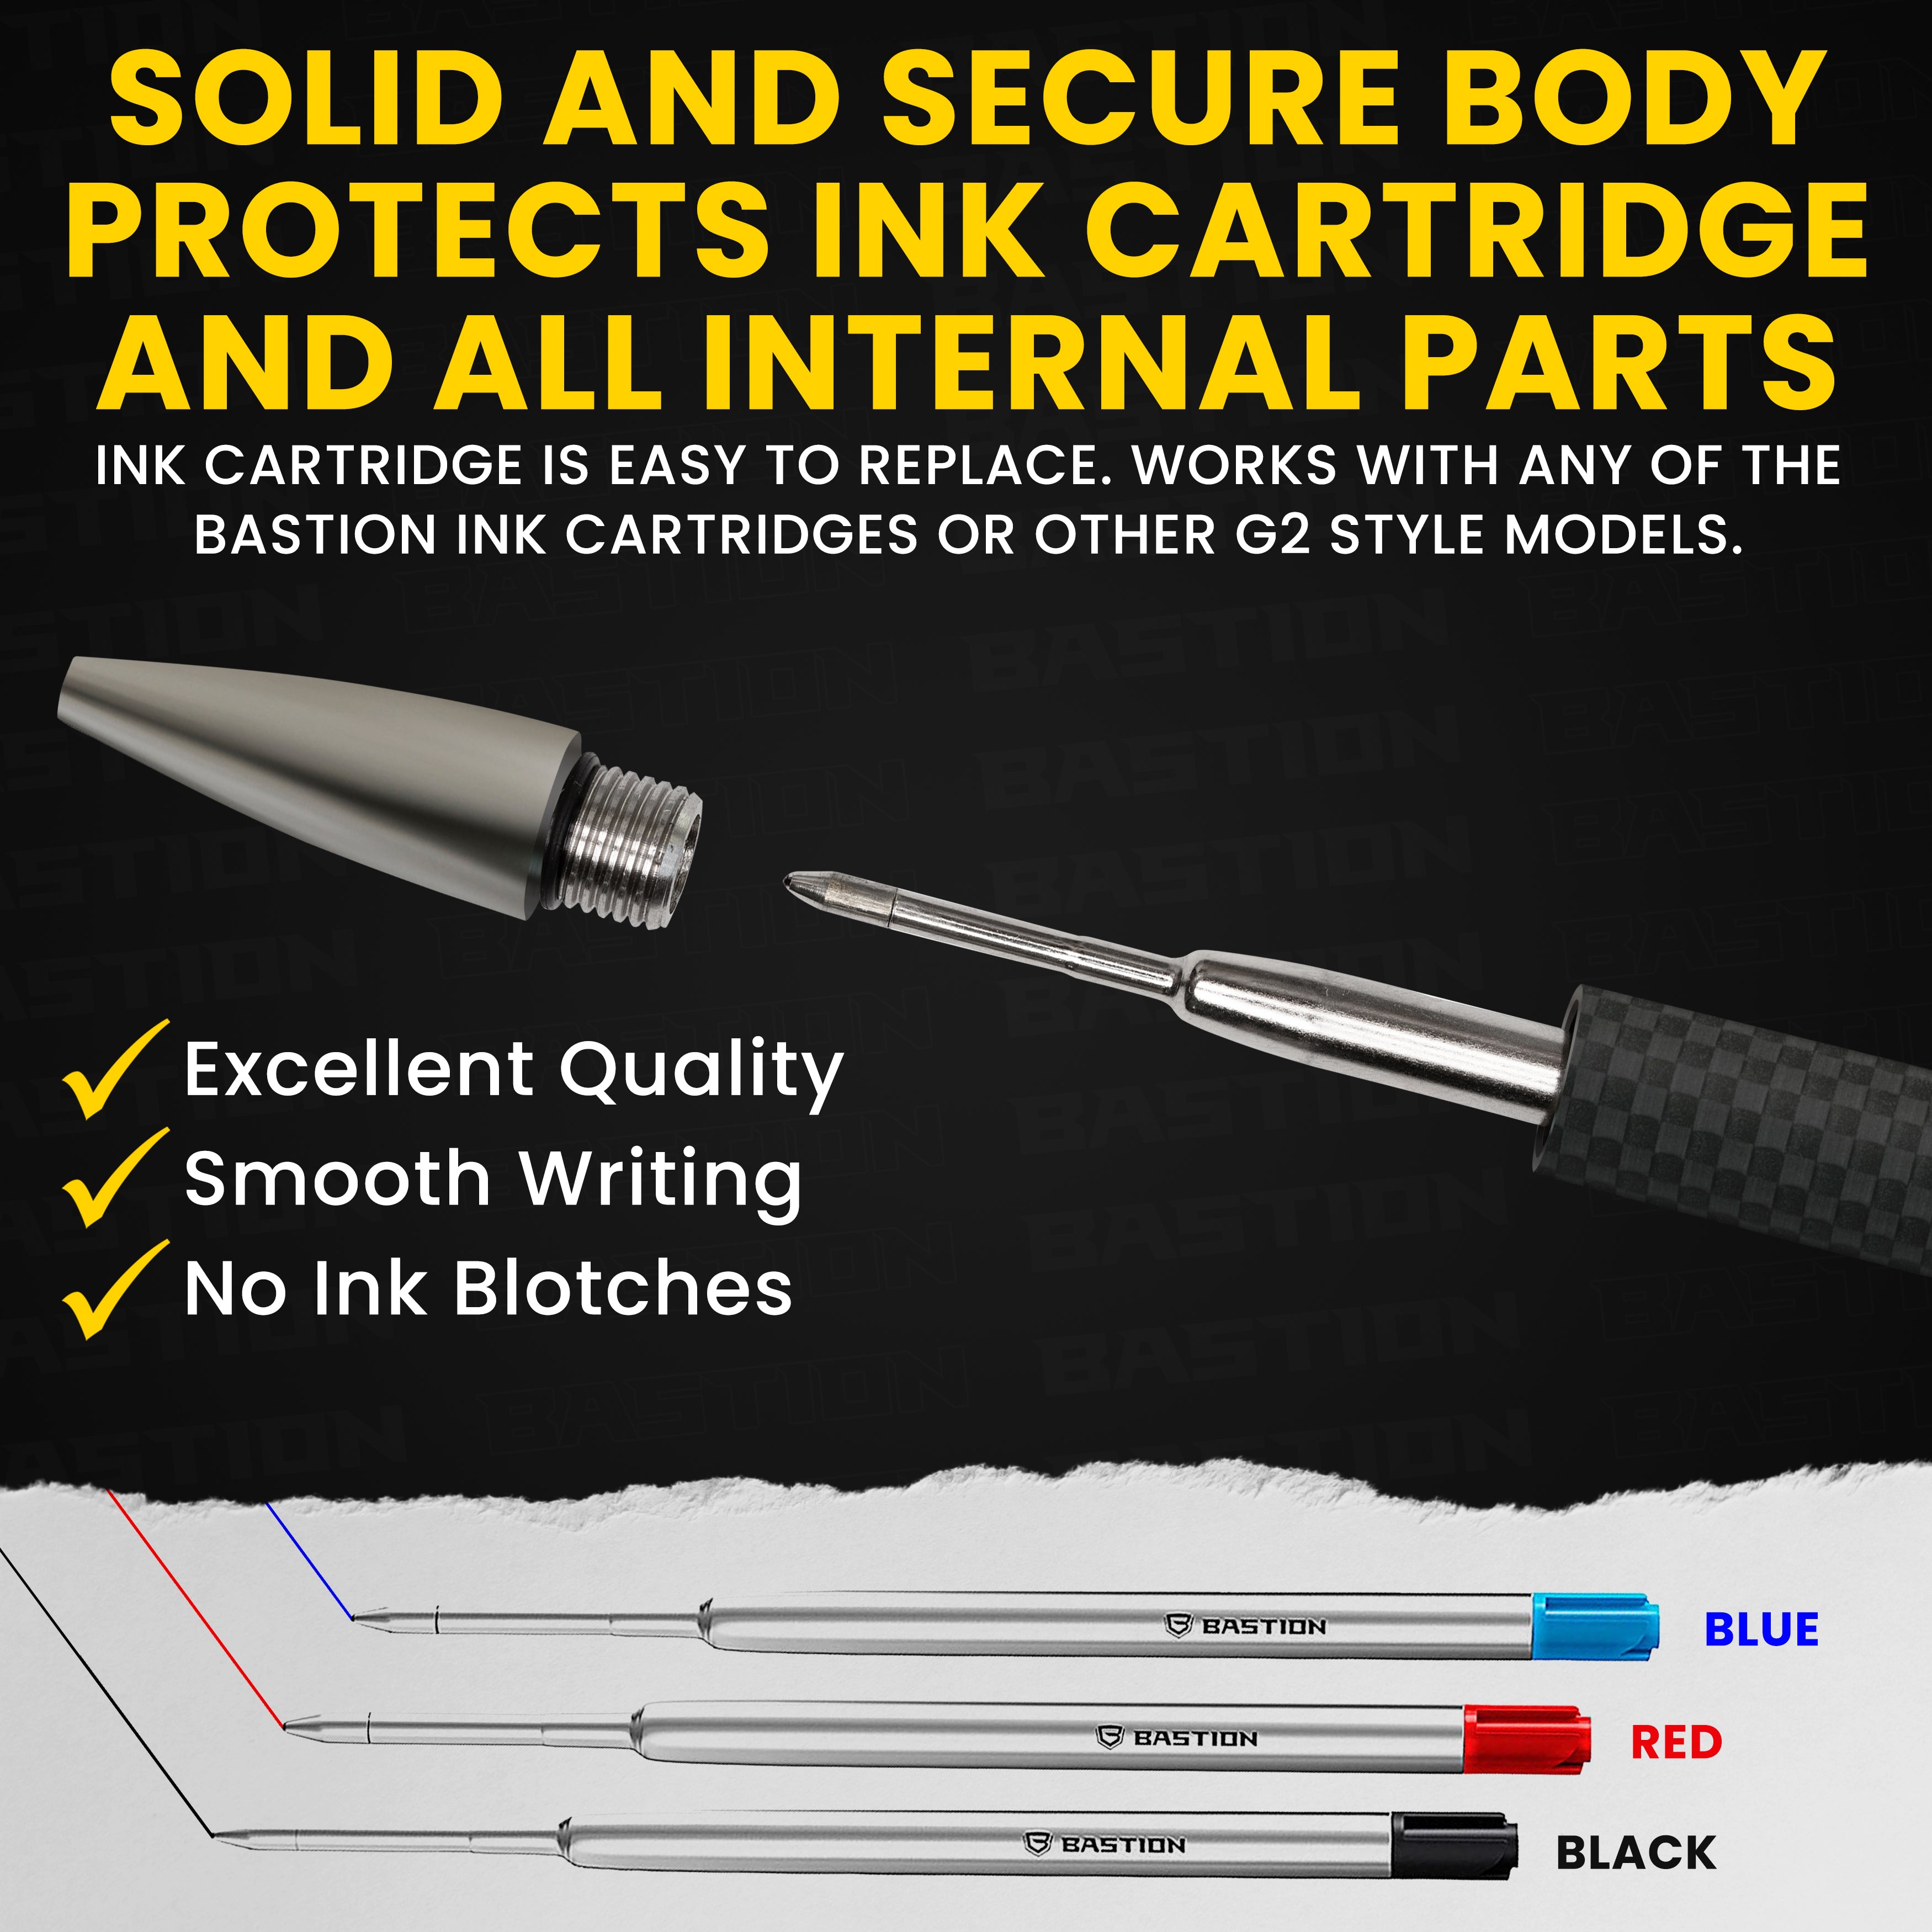 Carbon Fiber and Stainless Steel - Bolt Action Pen by Bastion®